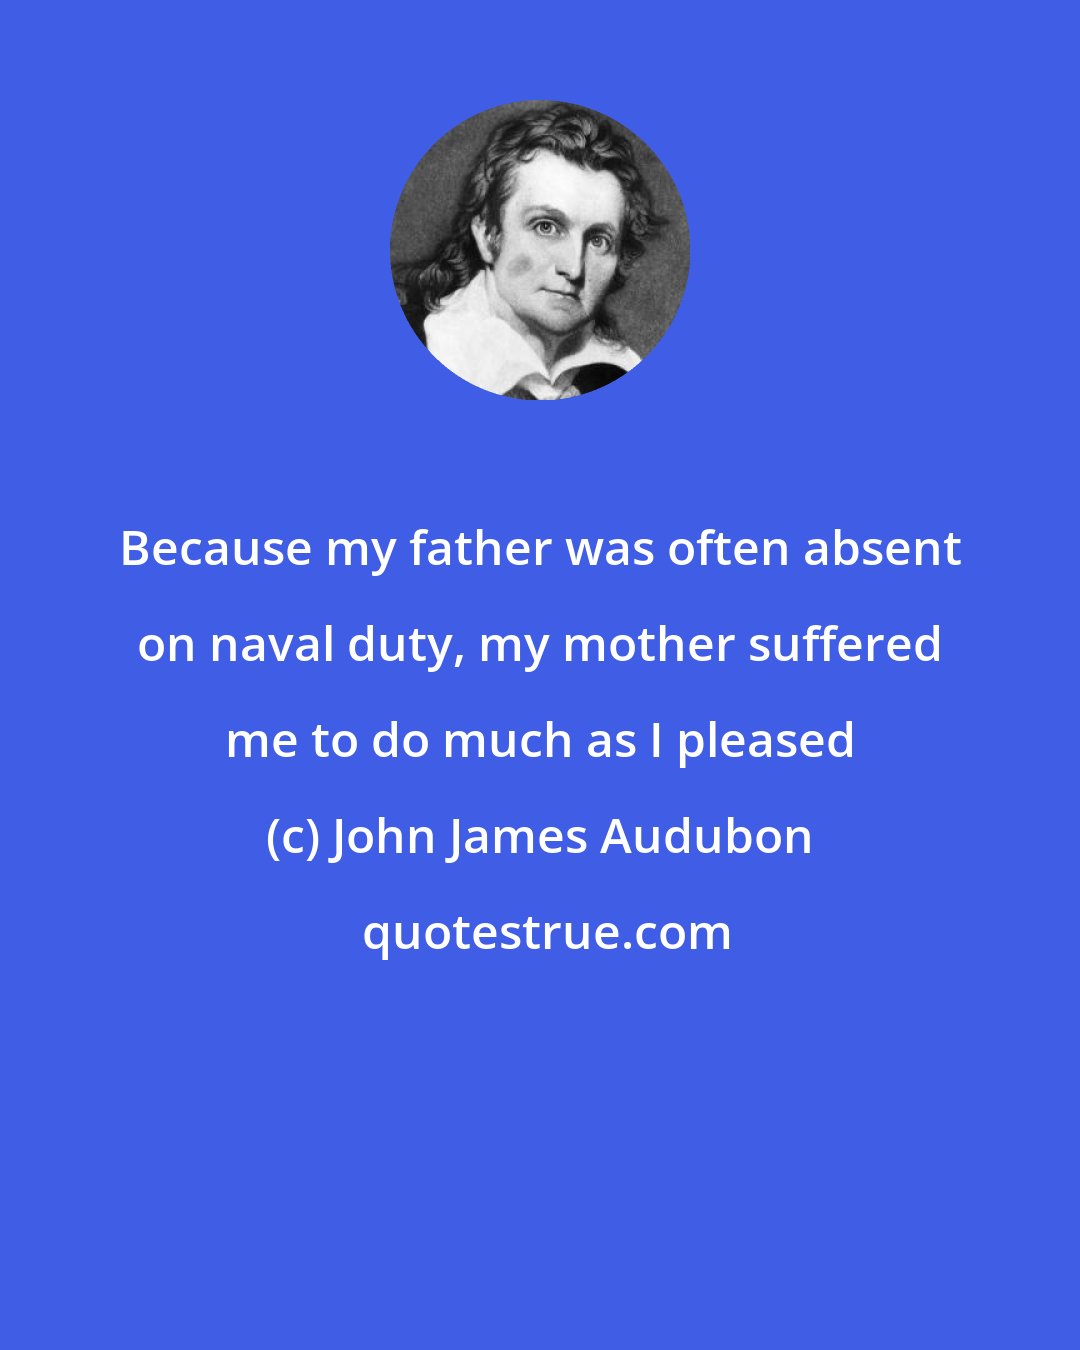 John James Audubon: Because my father was often absent on naval duty, my mother suffered me to do much as I pleased